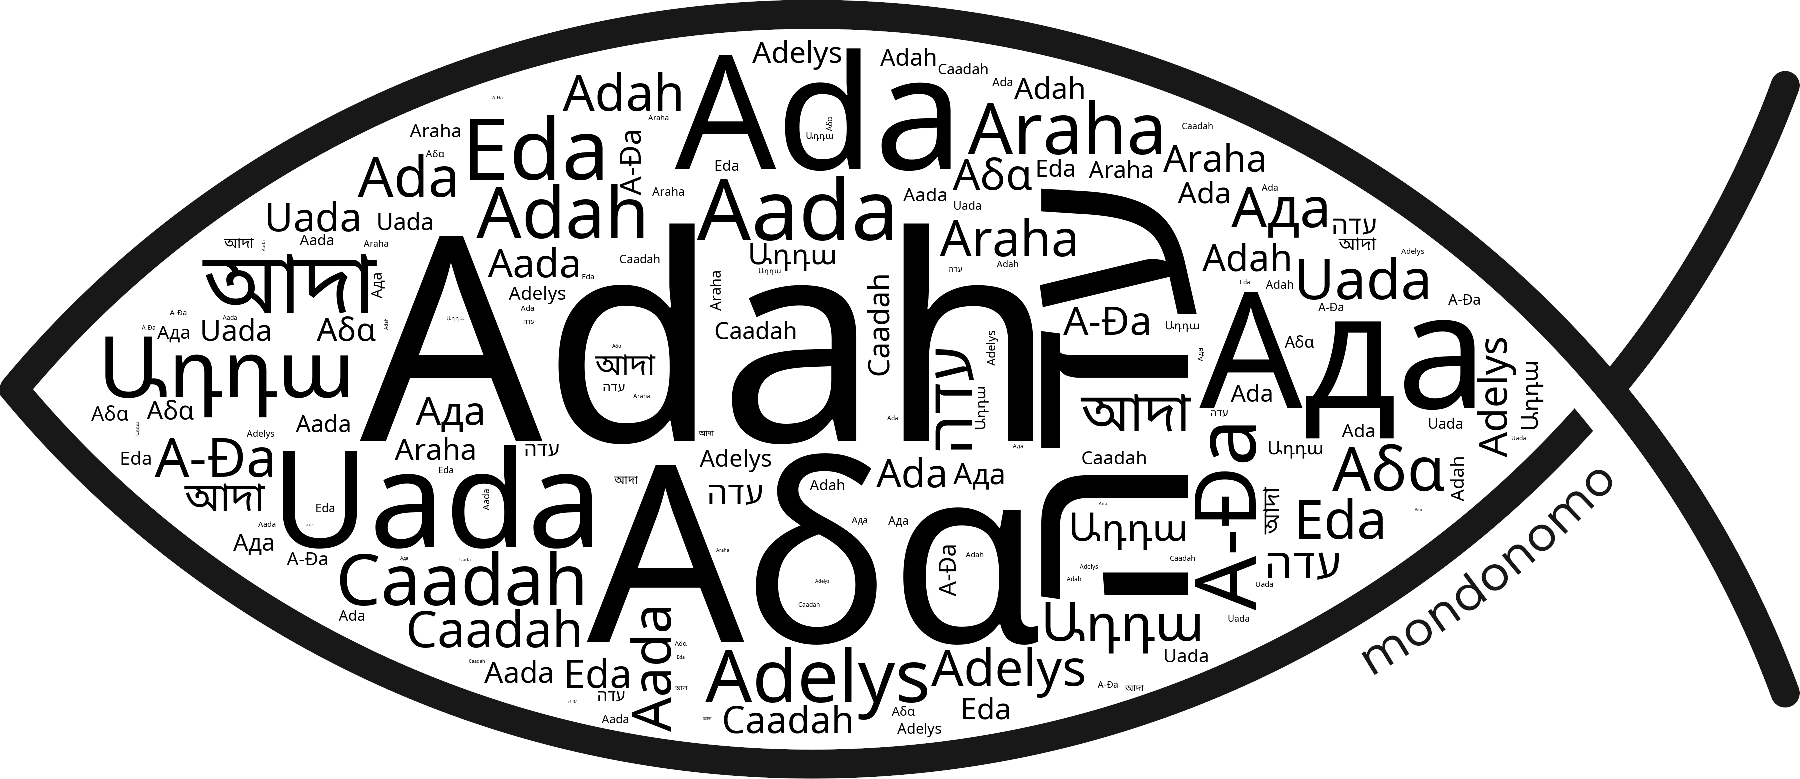 Name Adah in the world's Bibles